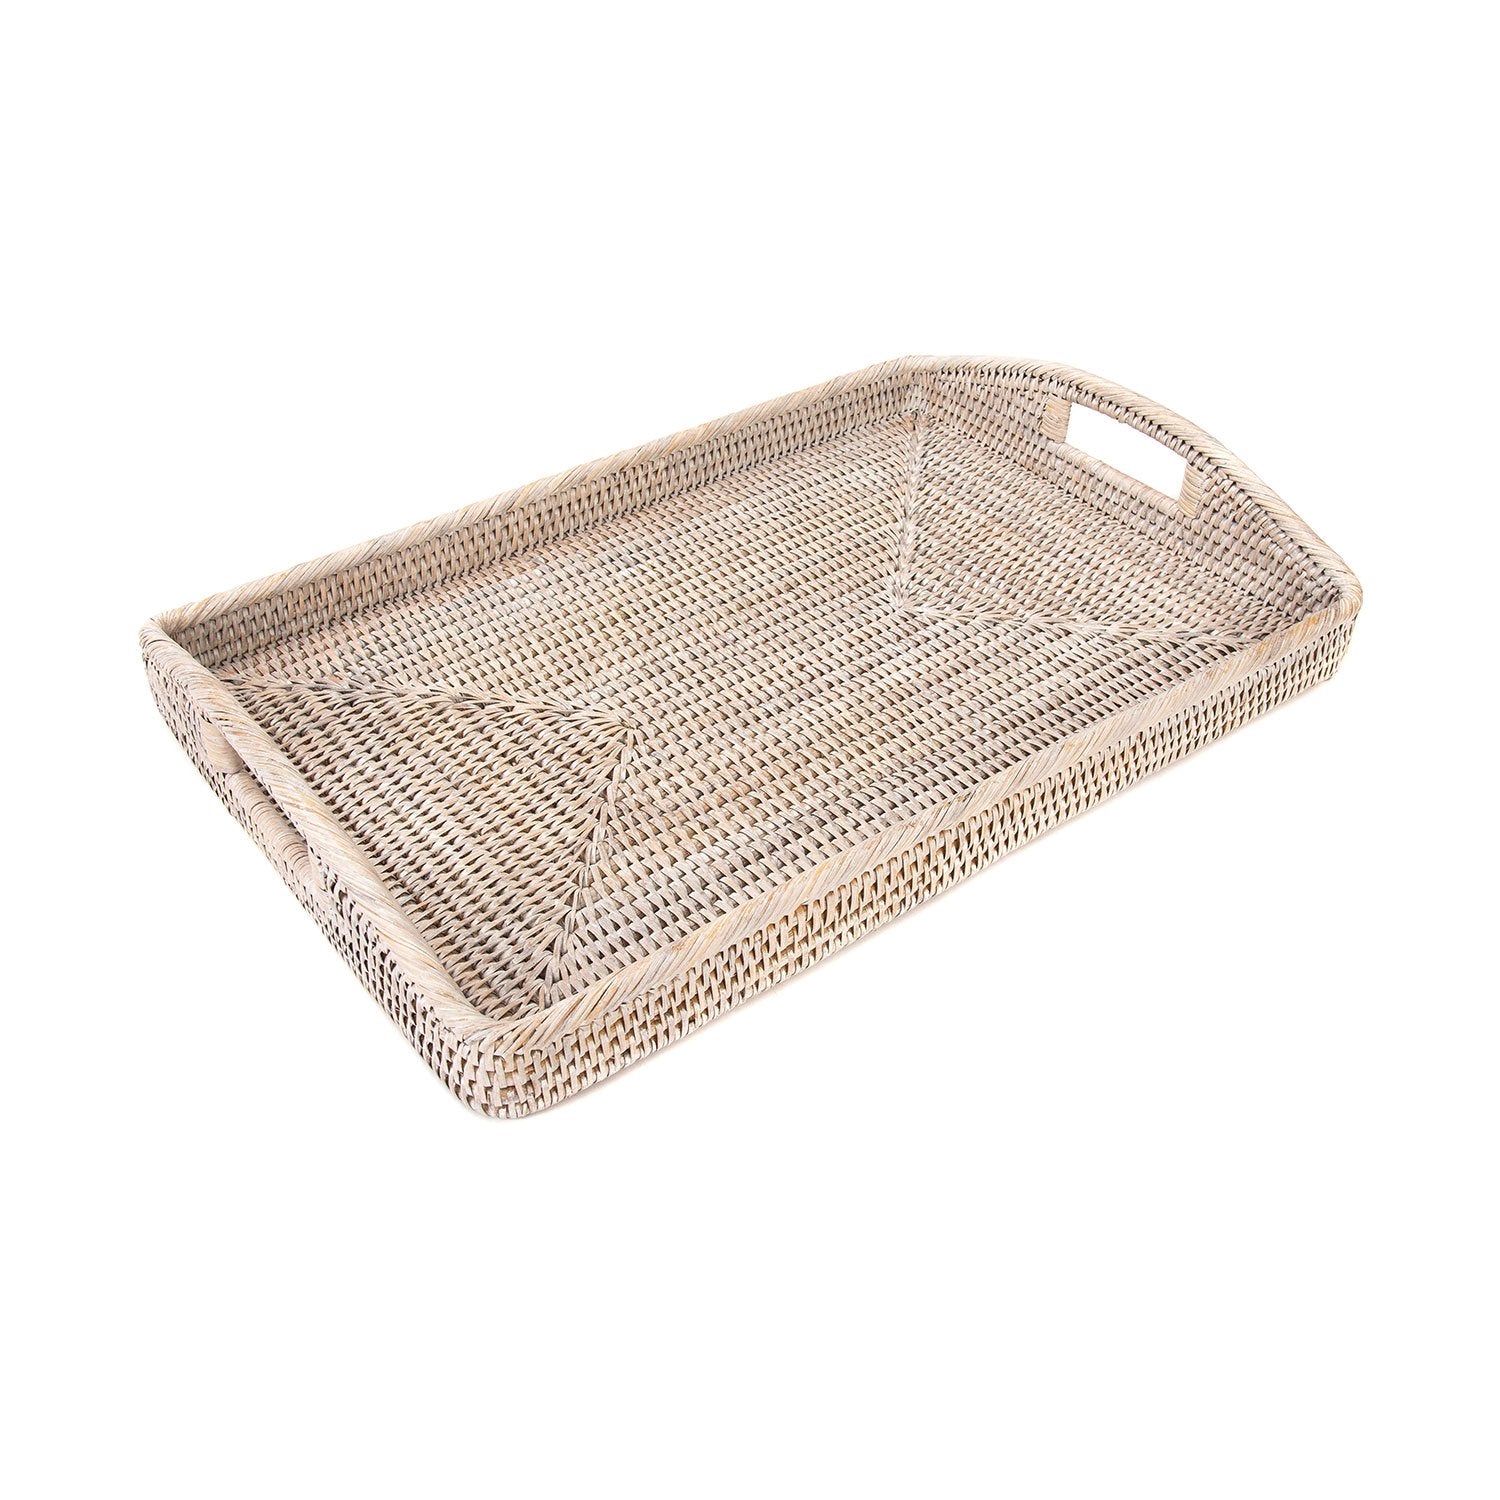 Large Woven Tray with Handles in Whitewash